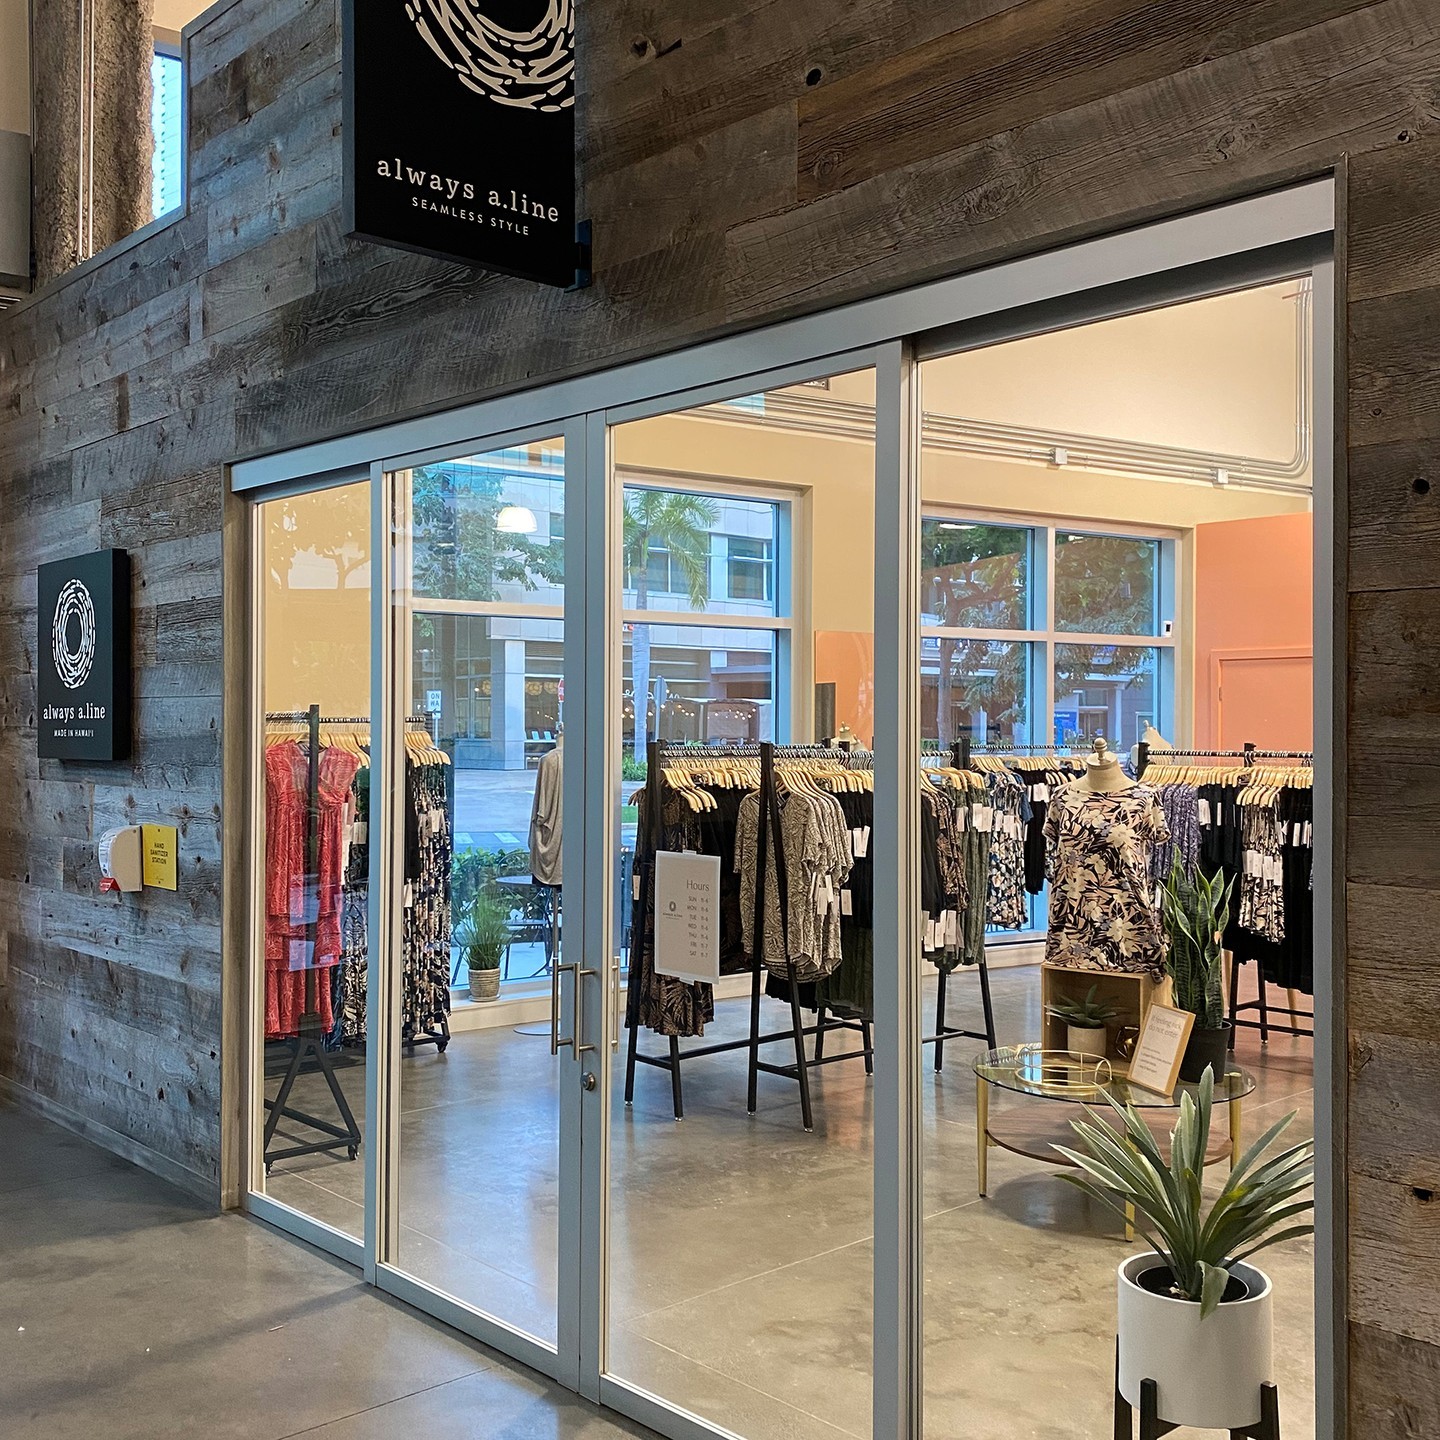 A warm welcome to @alwaysa.line, the latest boutique to open in South Shore Market. This ladies' clothing and accessories shop is the first permanent storefront for Honolulu designer Lynn Sakutori, whose stylish clothes are perfect for everyday living in Hawai‘i. Click the link in our bio to learn more!